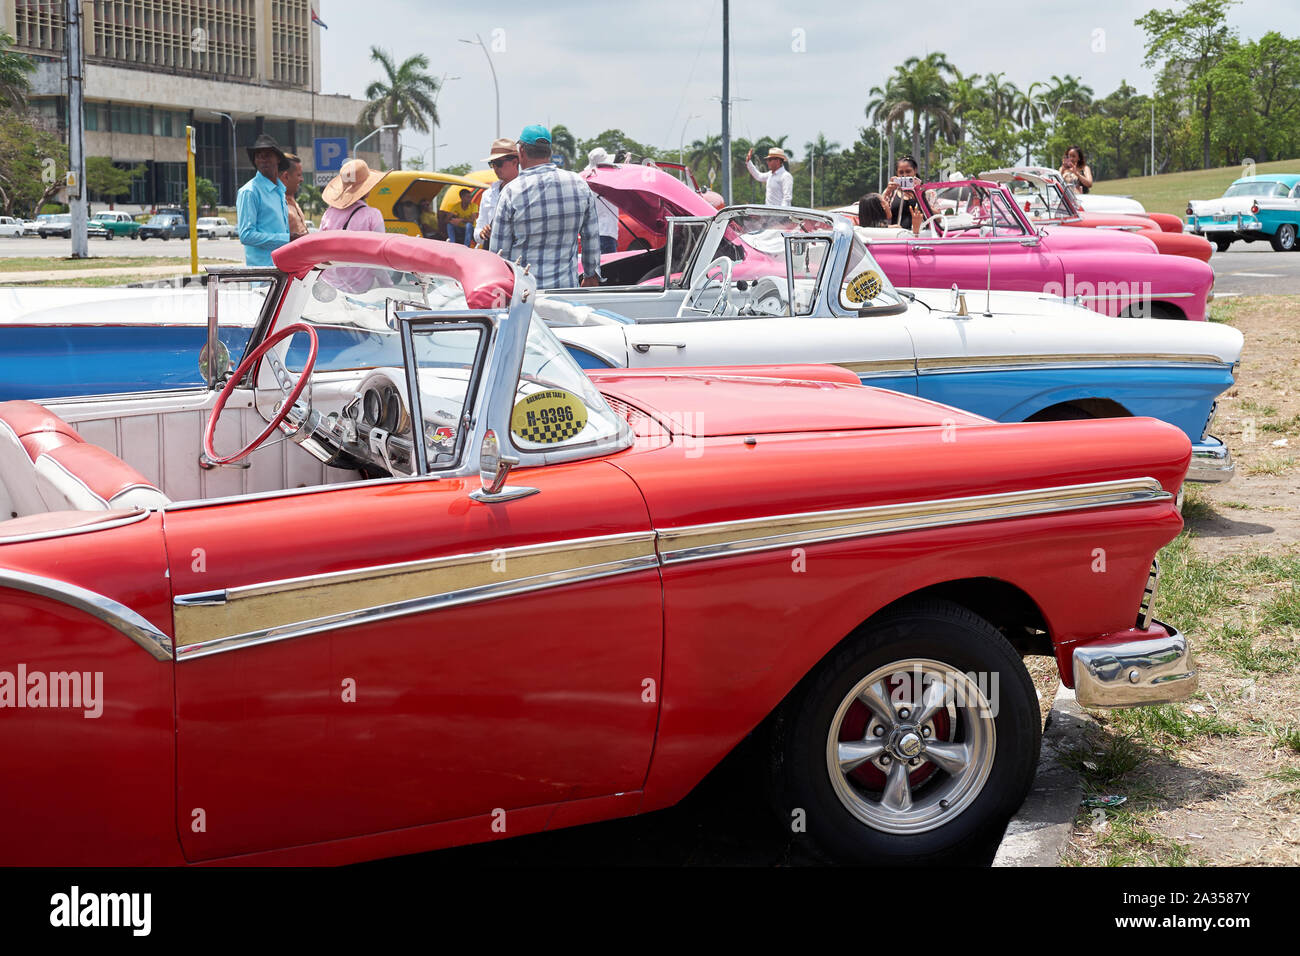 Classic cars, taxis, trucks and motorcycles are abundant on the streets of Havana, Cuba Stock Photo